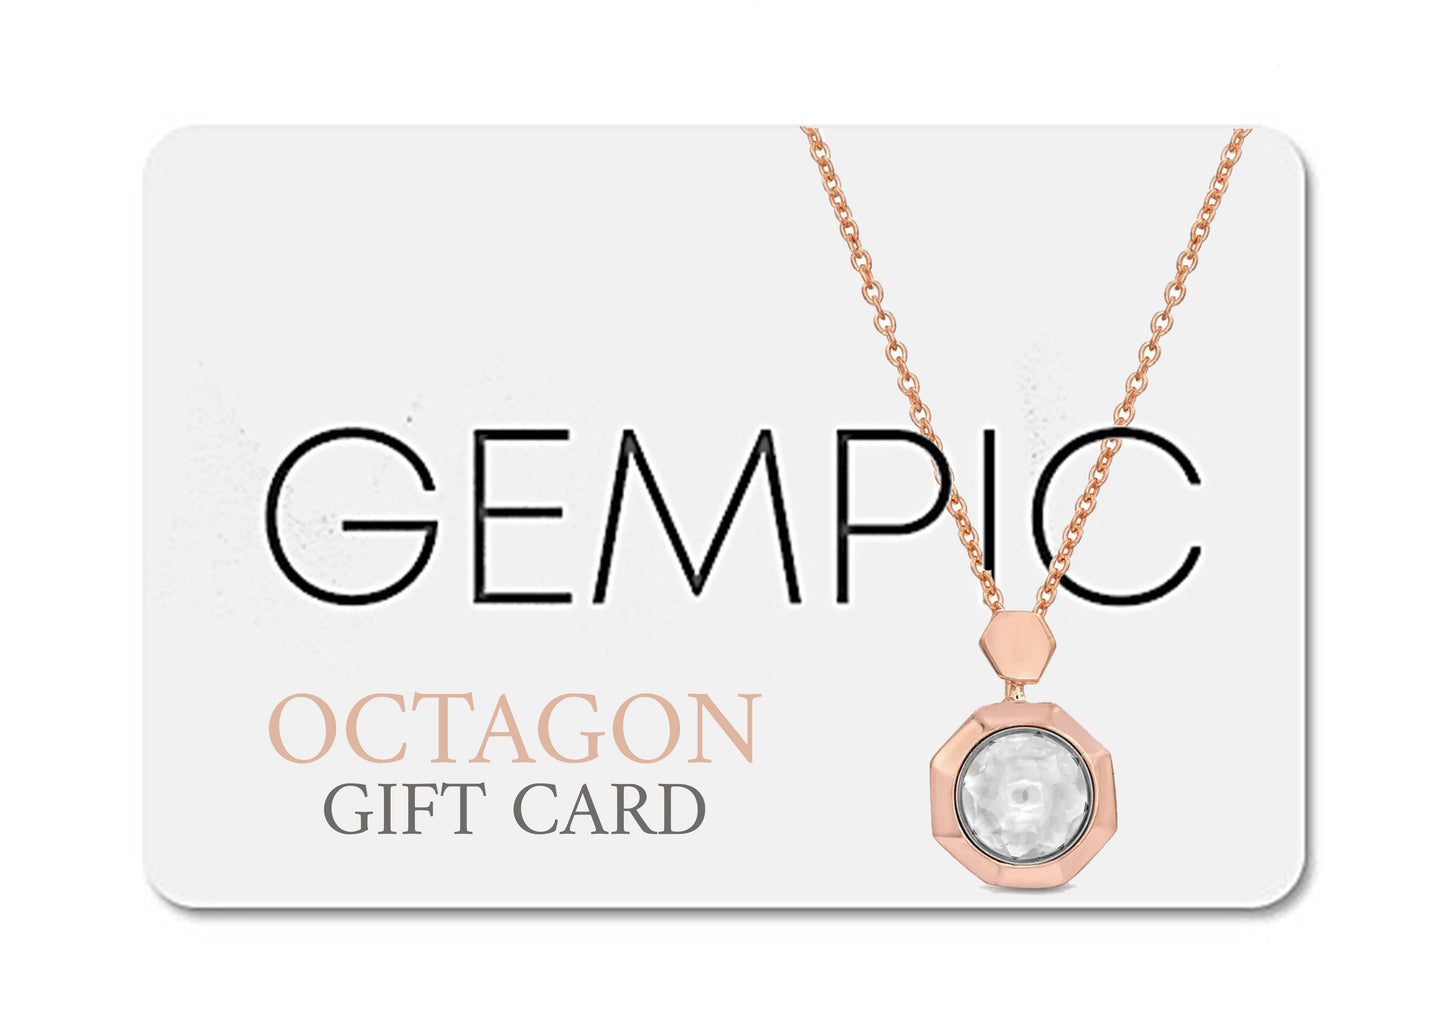 Octagon Gift Card